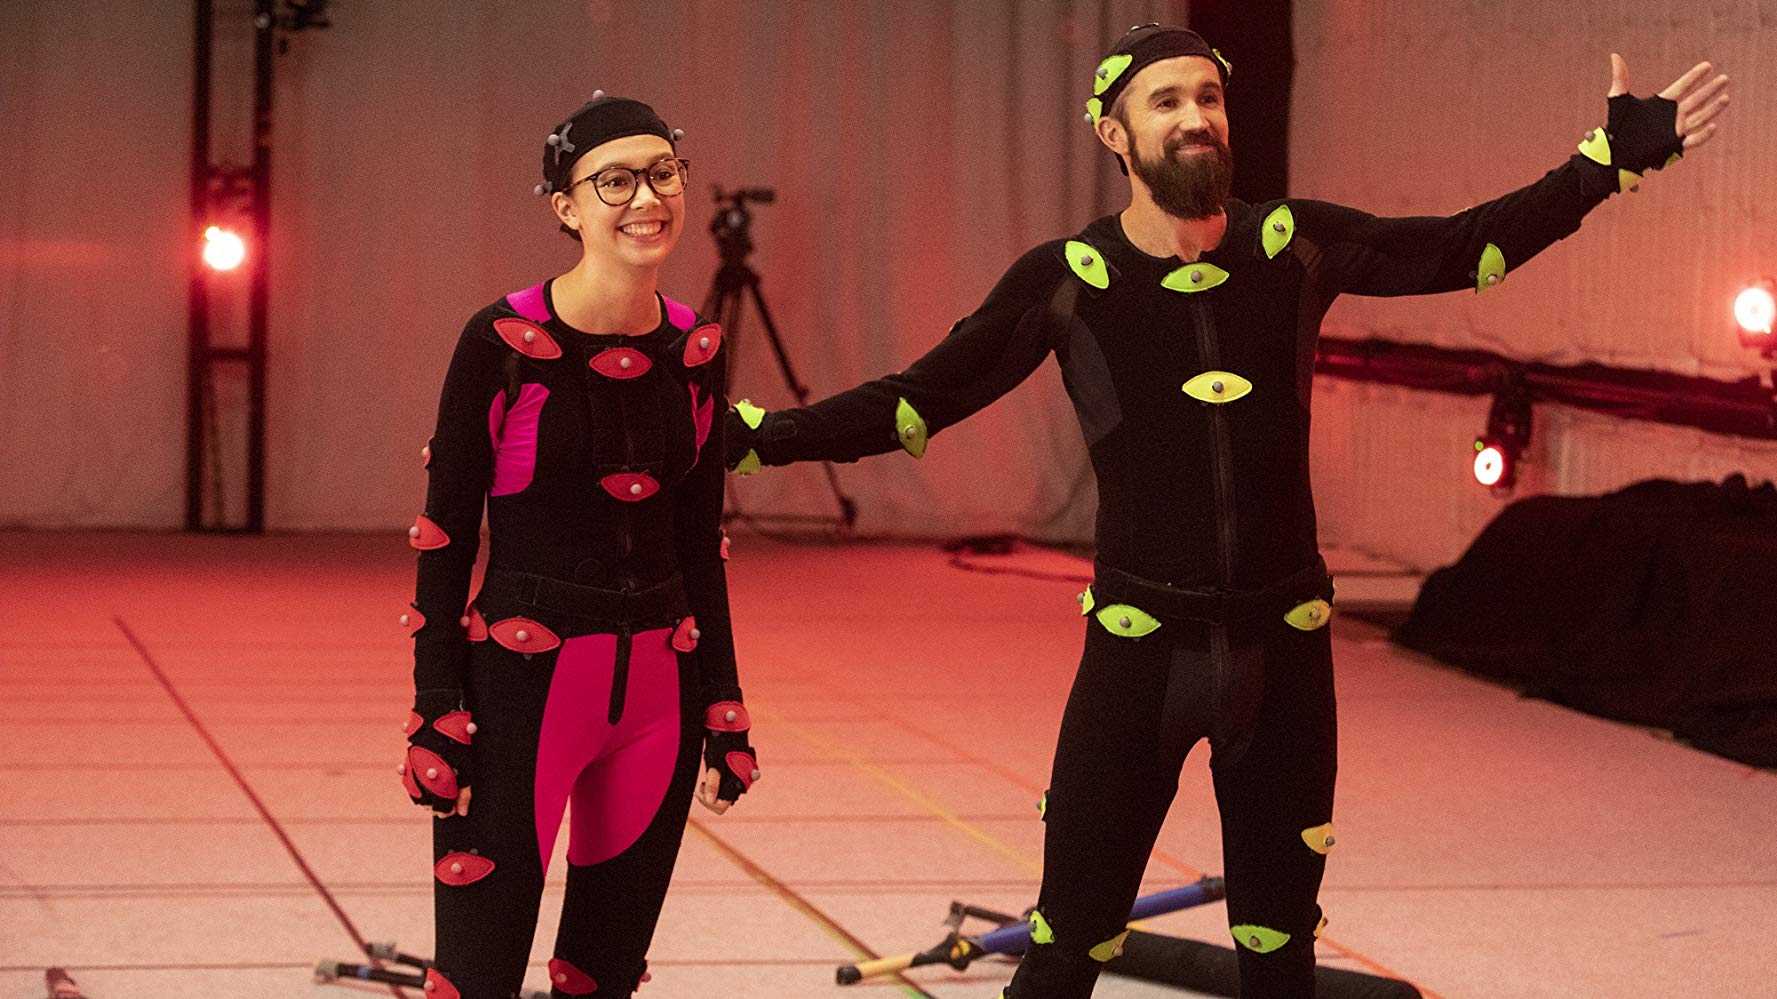 Poppy (left) and Ian (right) preparing the motion capture for the unmasking of the Masked Man